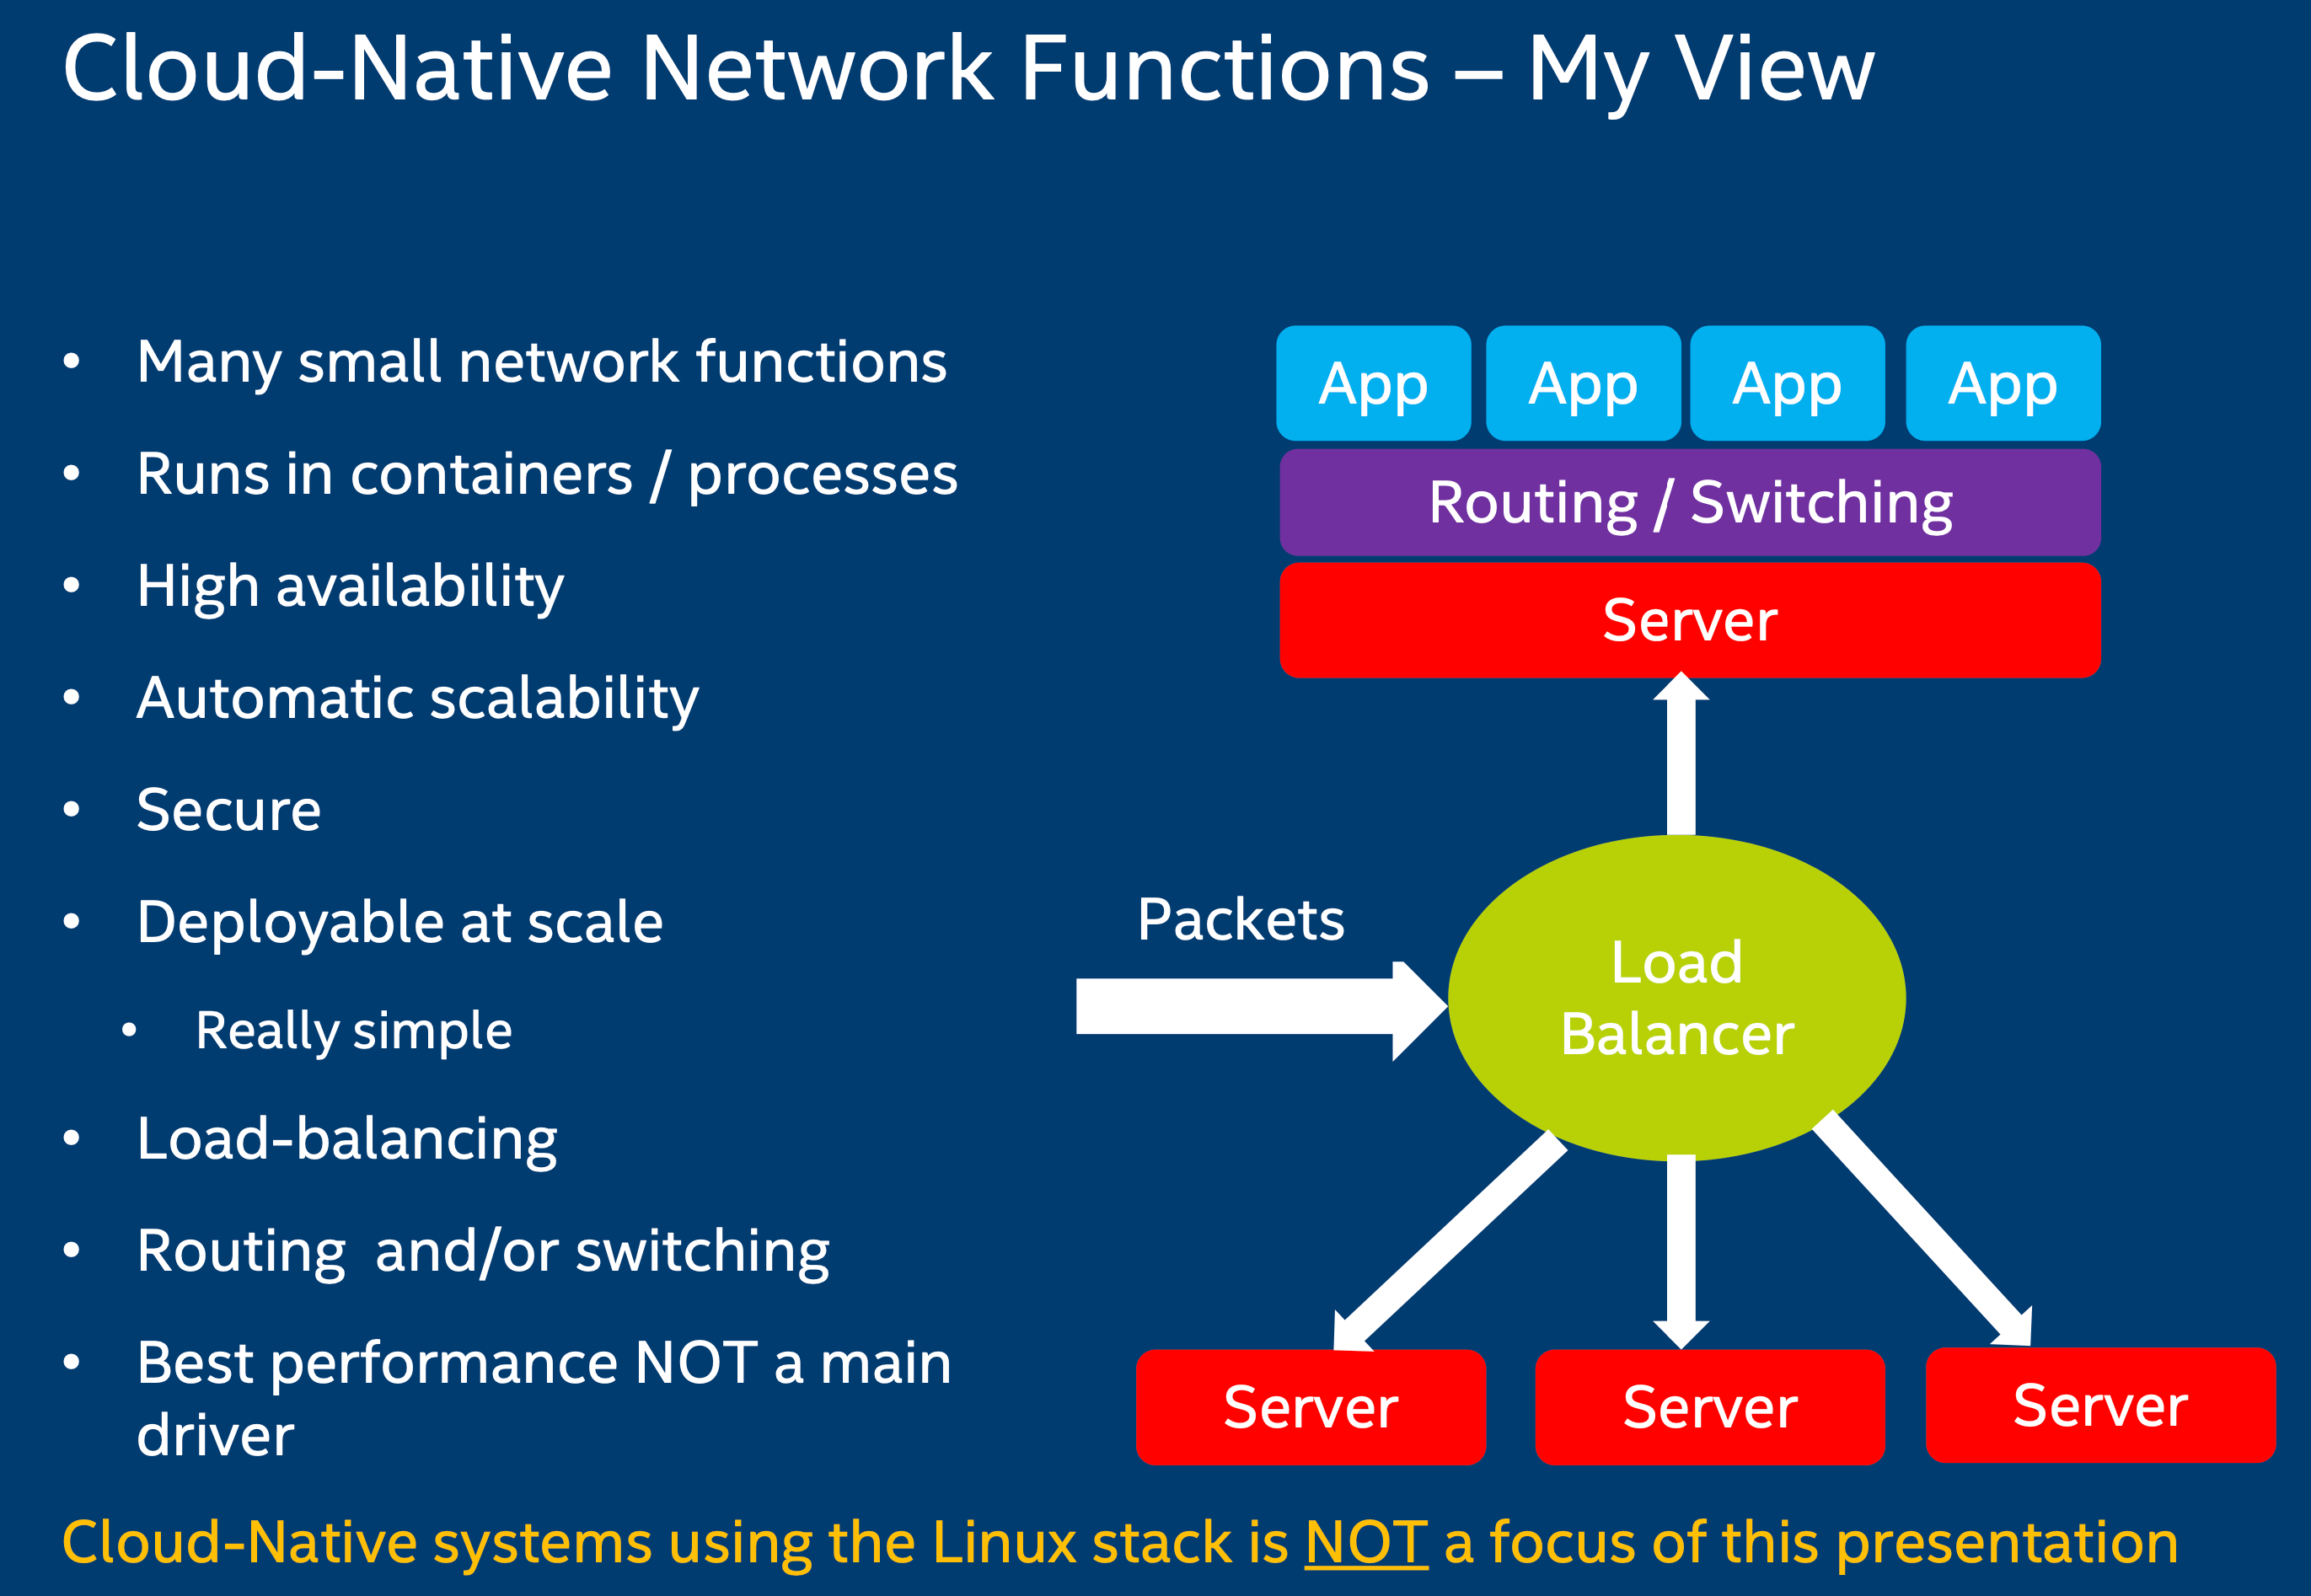 Cloud Native Networking functions view